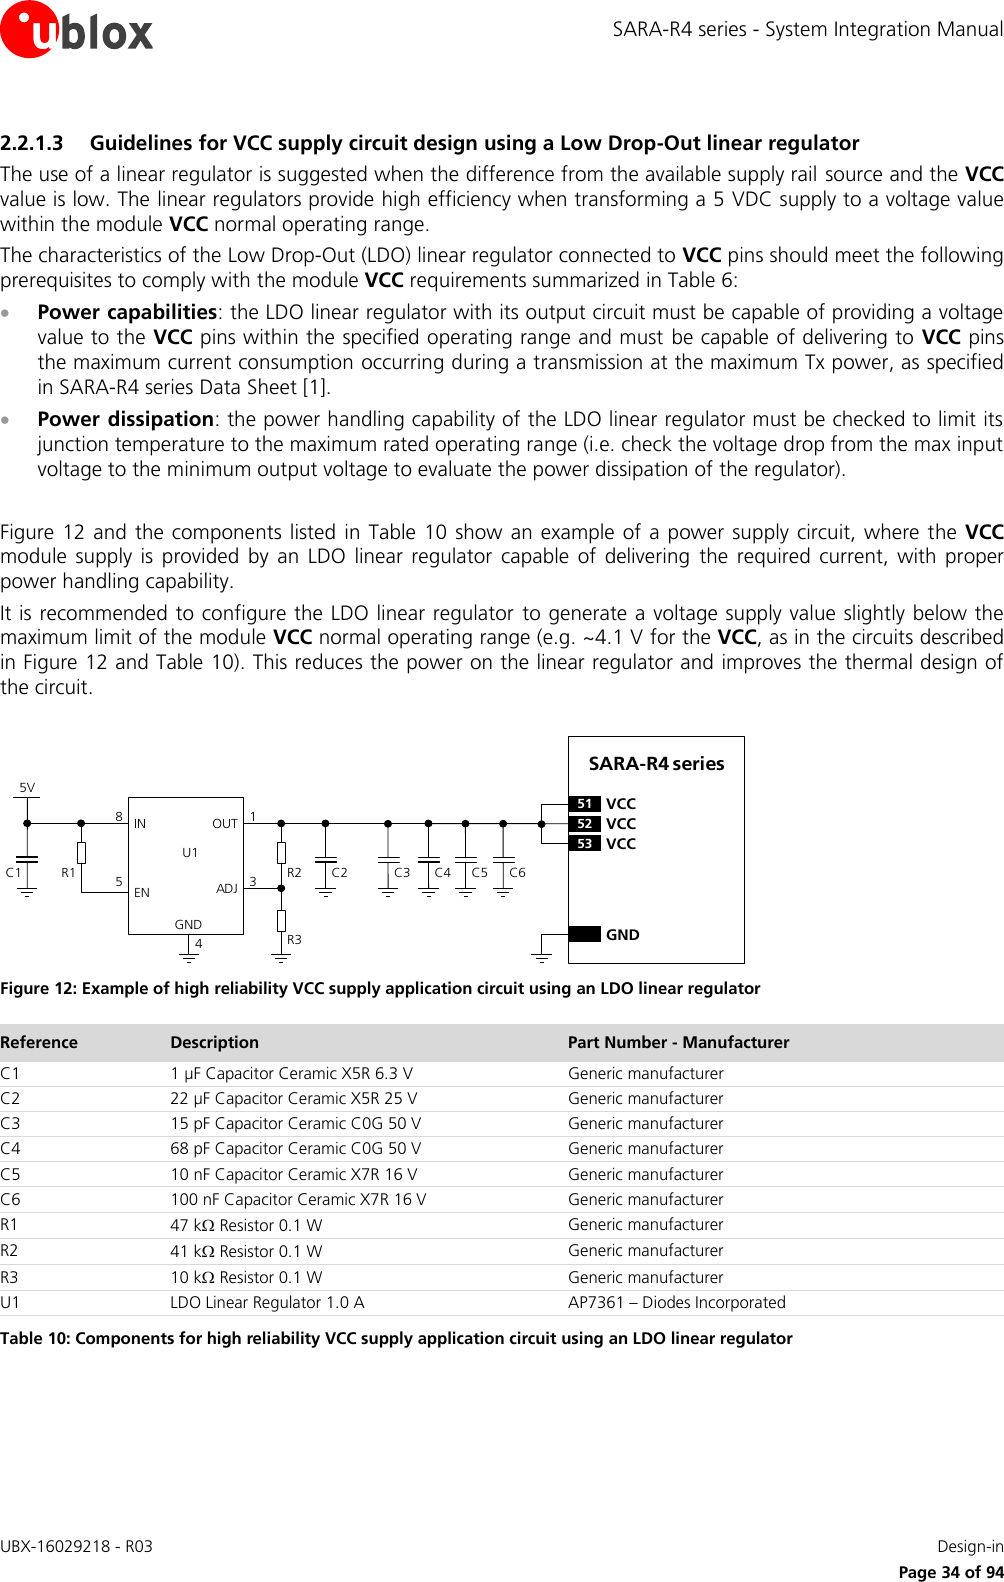 SARA-R4 series - System Integration Manual UBX-16029218 - R03    Design-in     Page 34 of 94 2.2.1.3 Guidelines for VCC supply circuit design using a Low Drop-Out linear regulator The use of a linear regulator is suggested when the difference from the available supply rail source and the VCC value is low. The linear regulators provide high efficiency when transforming a 5 VDC supply to a voltage value within the module VCC normal operating range. The characteristics of the Low Drop-Out (LDO) linear regulator connected to VCC pins should meet the following prerequisites to comply with the module VCC requirements summarized in Table 6:  Power capabilities: the LDO linear regulator with its output circuit must be capable of providing a voltage value to the VCC pins within the specified operating range and must  be capable of delivering to  VCC pins the maximum current consumption occurring during a transmission at the maximum Tx power, as specified in SARA-R4 series Data Sheet [1].  Power dissipation: the power handling capability of the LDO linear regulator must be checked to limit its junction temperature to the maximum rated operating range (i.e. check the voltage drop from the max input voltage to the minimum output voltage to evaluate the power dissipation of the regulator).  Figure 12 and  the  components listed  in Table 10  show  an example of a power  supply circuit, where the  VCC module  supply  is  provided  by  an LDO  linear  regulator  capable  of  delivering  the  required  current,  with proper power handling capability. It is recommended to configure the LDO linear regulator  to generate a voltage supply value slightly below the maximum limit of the module VCC normal operating range (e.g. ~4.1 V for the VCC, as in the circuits described in Figure 12 and Table 10). This reduces the power on the linear regulator and improves the thermal design of the circuit.  5VC1 R1IN OUTADJGND58134C2R2R3U1ENSARA-R4 series52 VCC53 VCC51 VCCGNDC4C3 C5 C6 Figure 12: Example of high reliability VCC supply application circuit using an LDO linear regulator Reference Description Part Number - Manufacturer C1 1 µF Capacitor Ceramic X5R 6.3 V Generic manufacturer C2 22 µF Capacitor Ceramic X5R 25 V Generic manufacturer C3 15 pF Capacitor Ceramic C0G 50 V Generic manufacturer C4 68 pF Capacitor Ceramic C0G 50 V Generic manufacturer C5 10 nF Capacitor Ceramic X7R 16 V Generic manufacturer C6 100 nF Capacitor Ceramic X7R 16 V Generic manufacturer R1 47 k Resistor 0.1 W Generic manufacturer R2 41 k Resistor 0.1 W Generic manufacturer R3 10 k Resistor 0.1 W Generic manufacturer U1 LDO Linear Regulator 1.0 A AP7361 – Diodes Incorporated Table 10: Components for high reliability VCC supply application circuit using an LDO linear regulator  